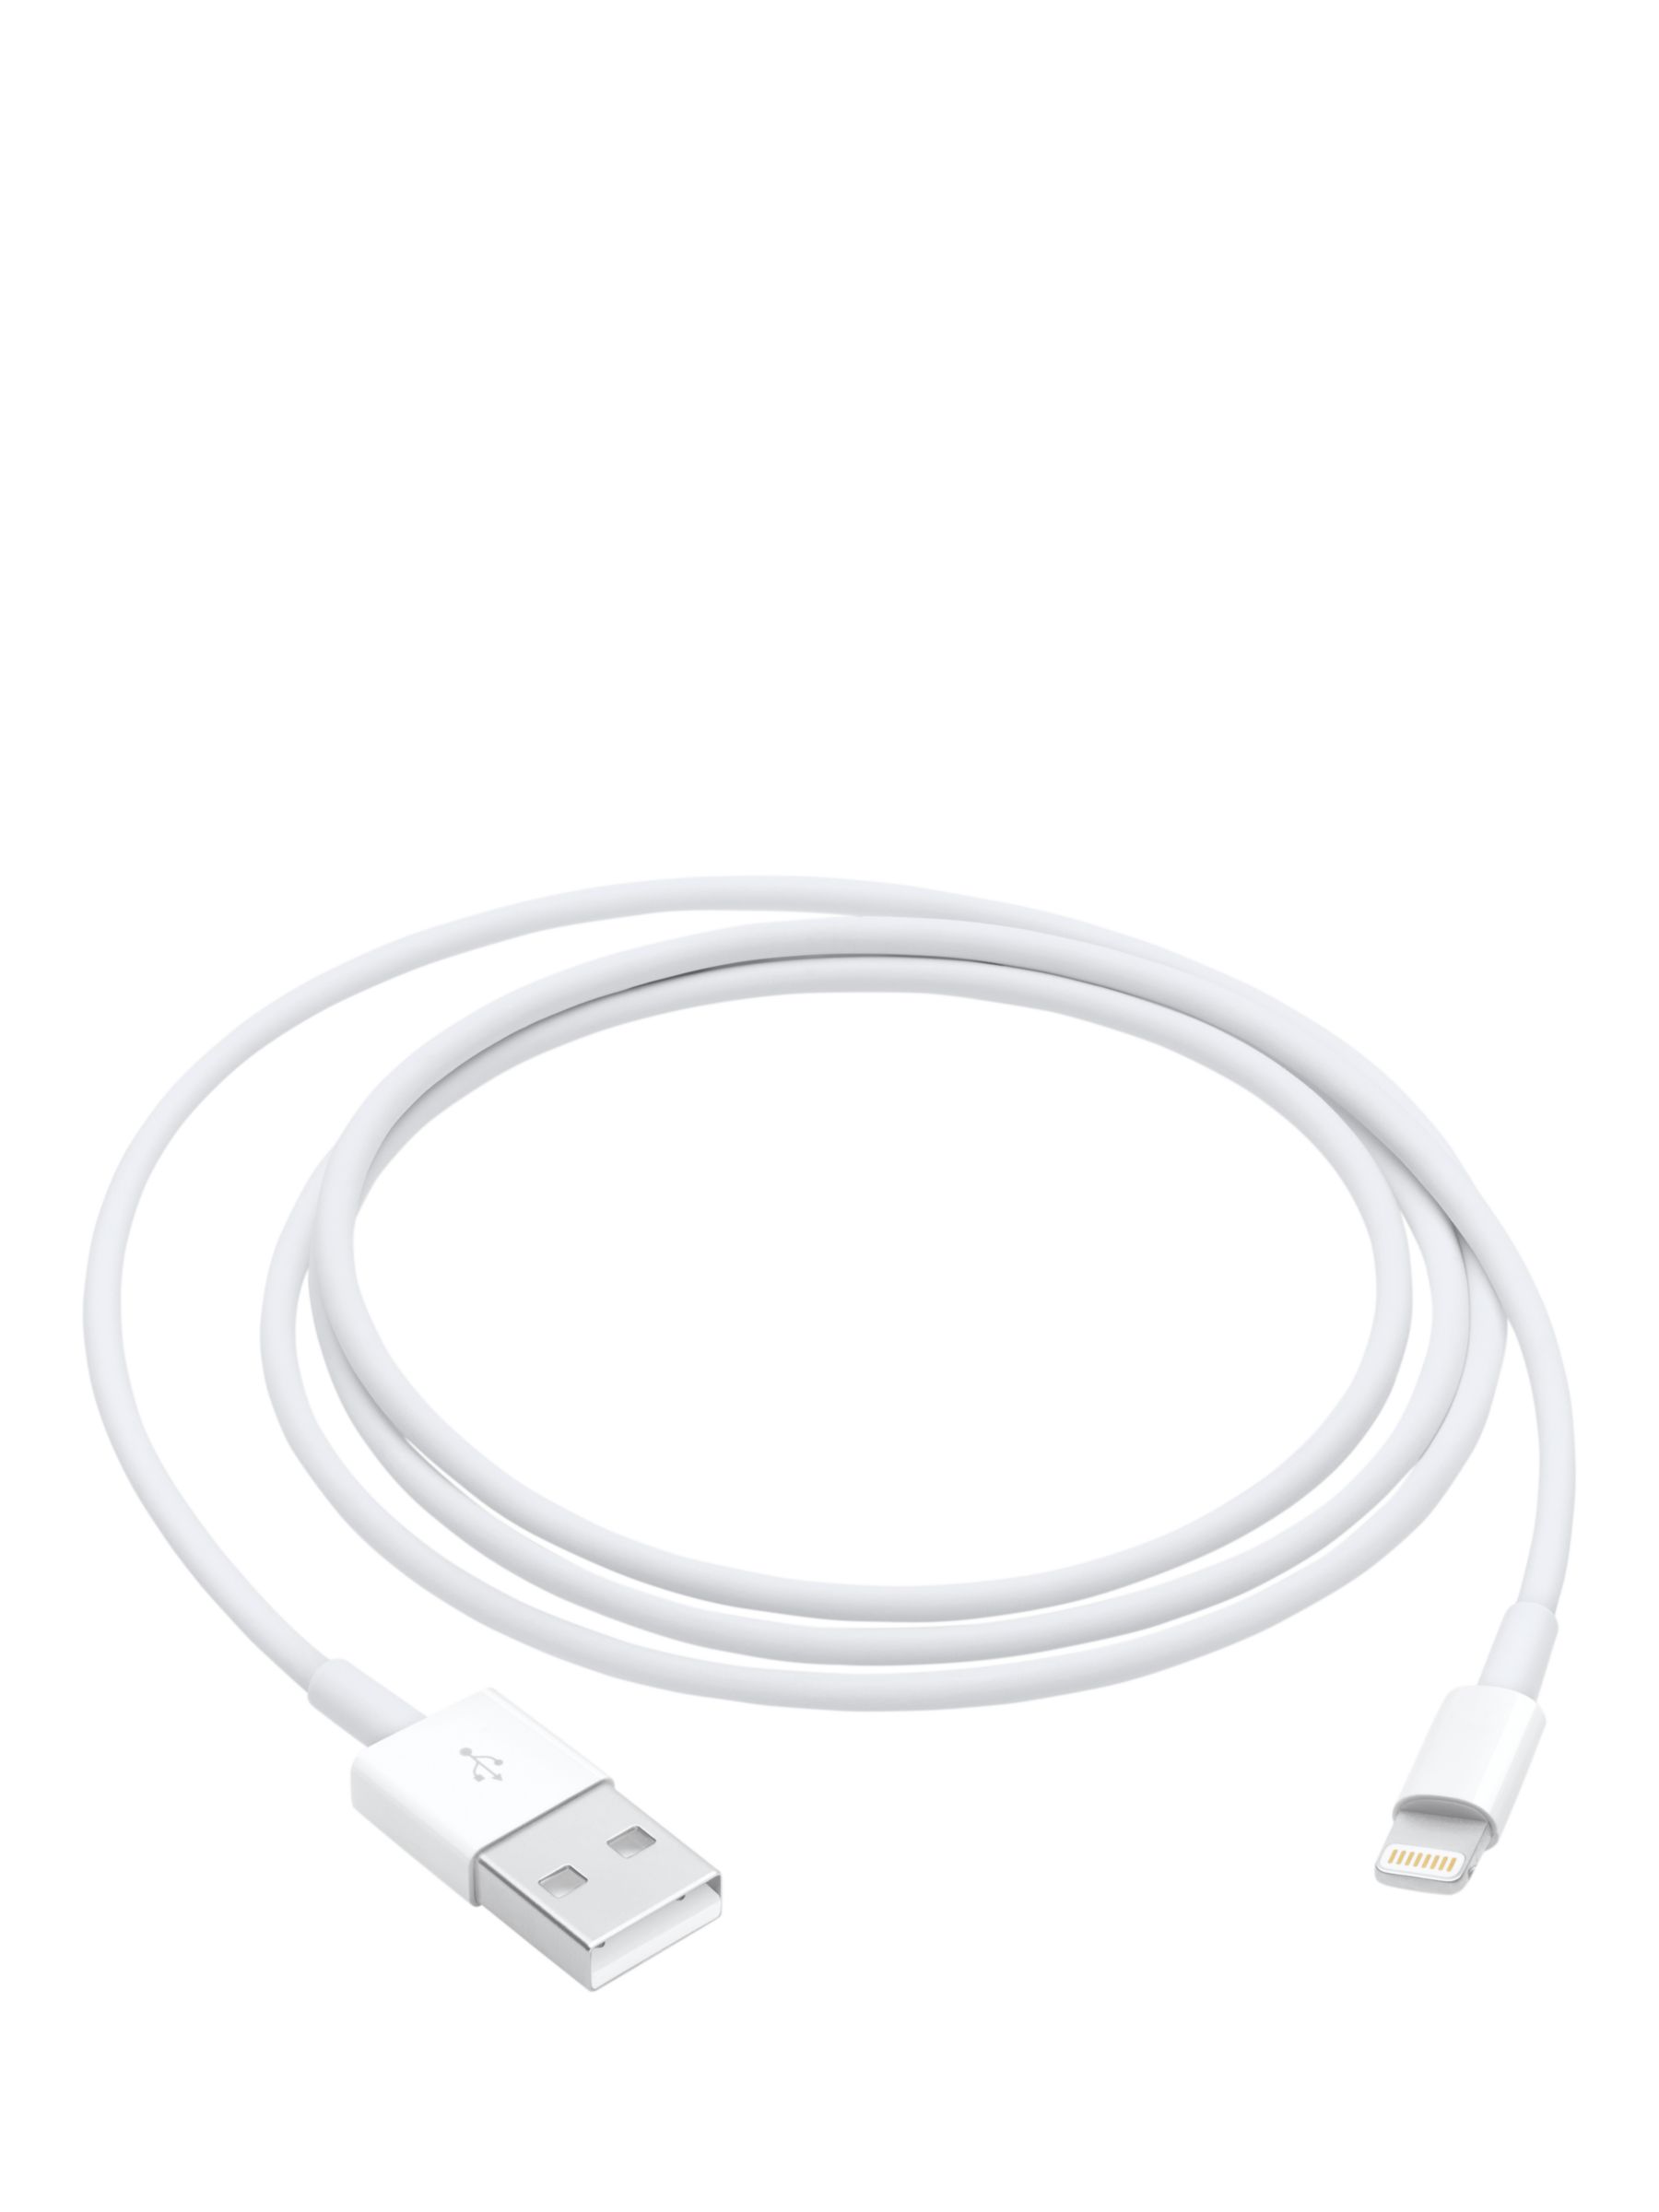 Apple to USB Cable,